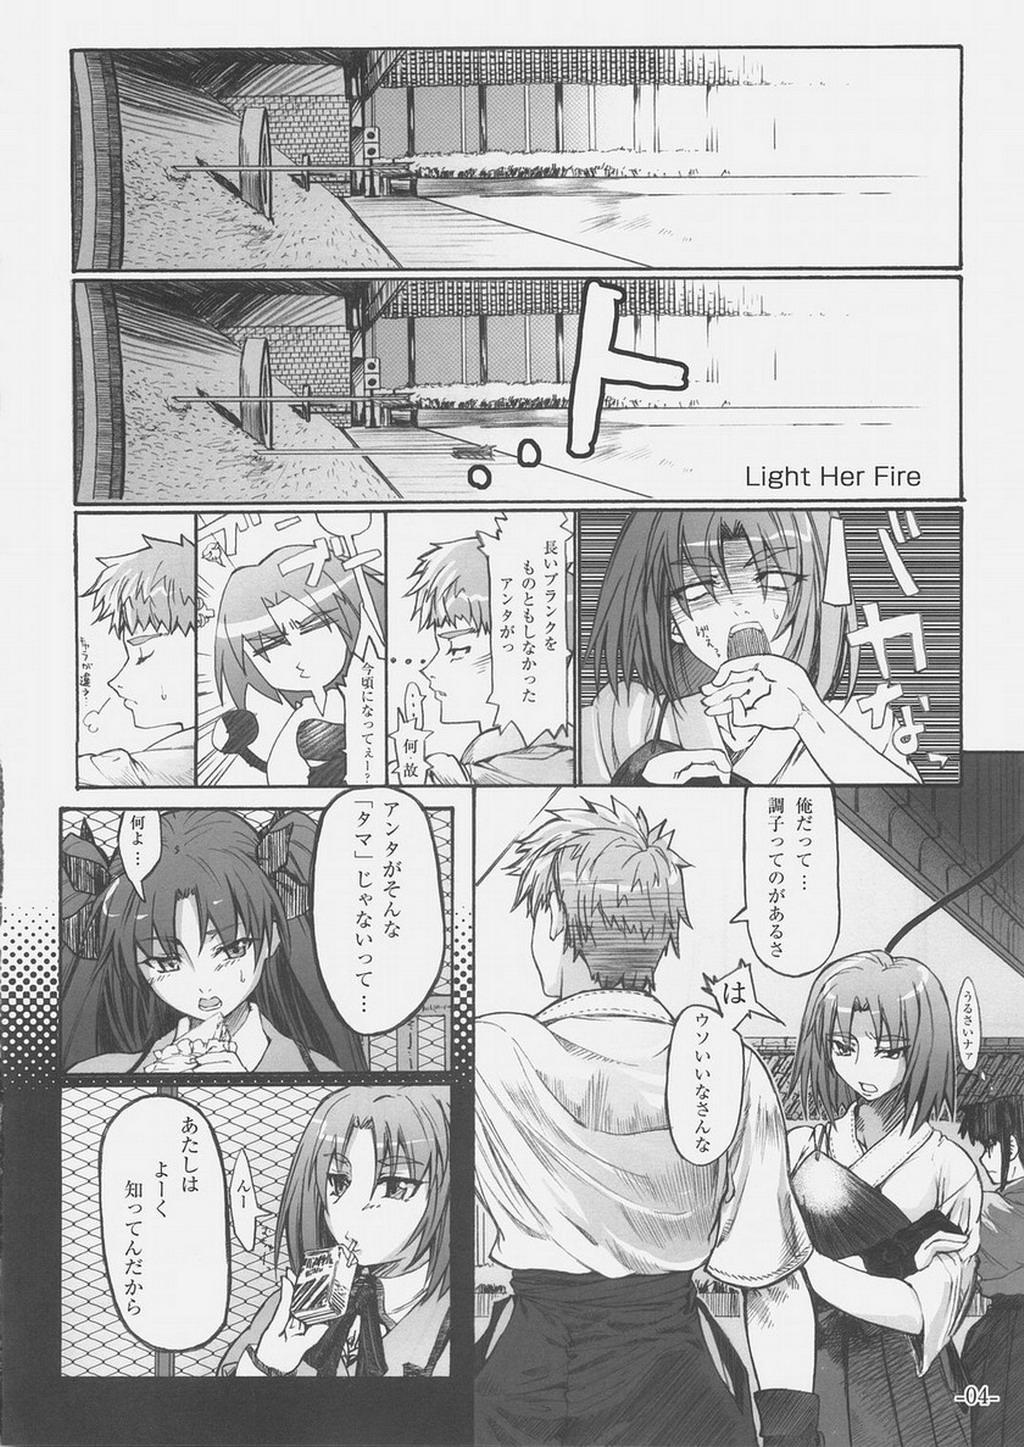 Caseiro Light Her Fire! - Fate stay night Stepfamily - Page 3